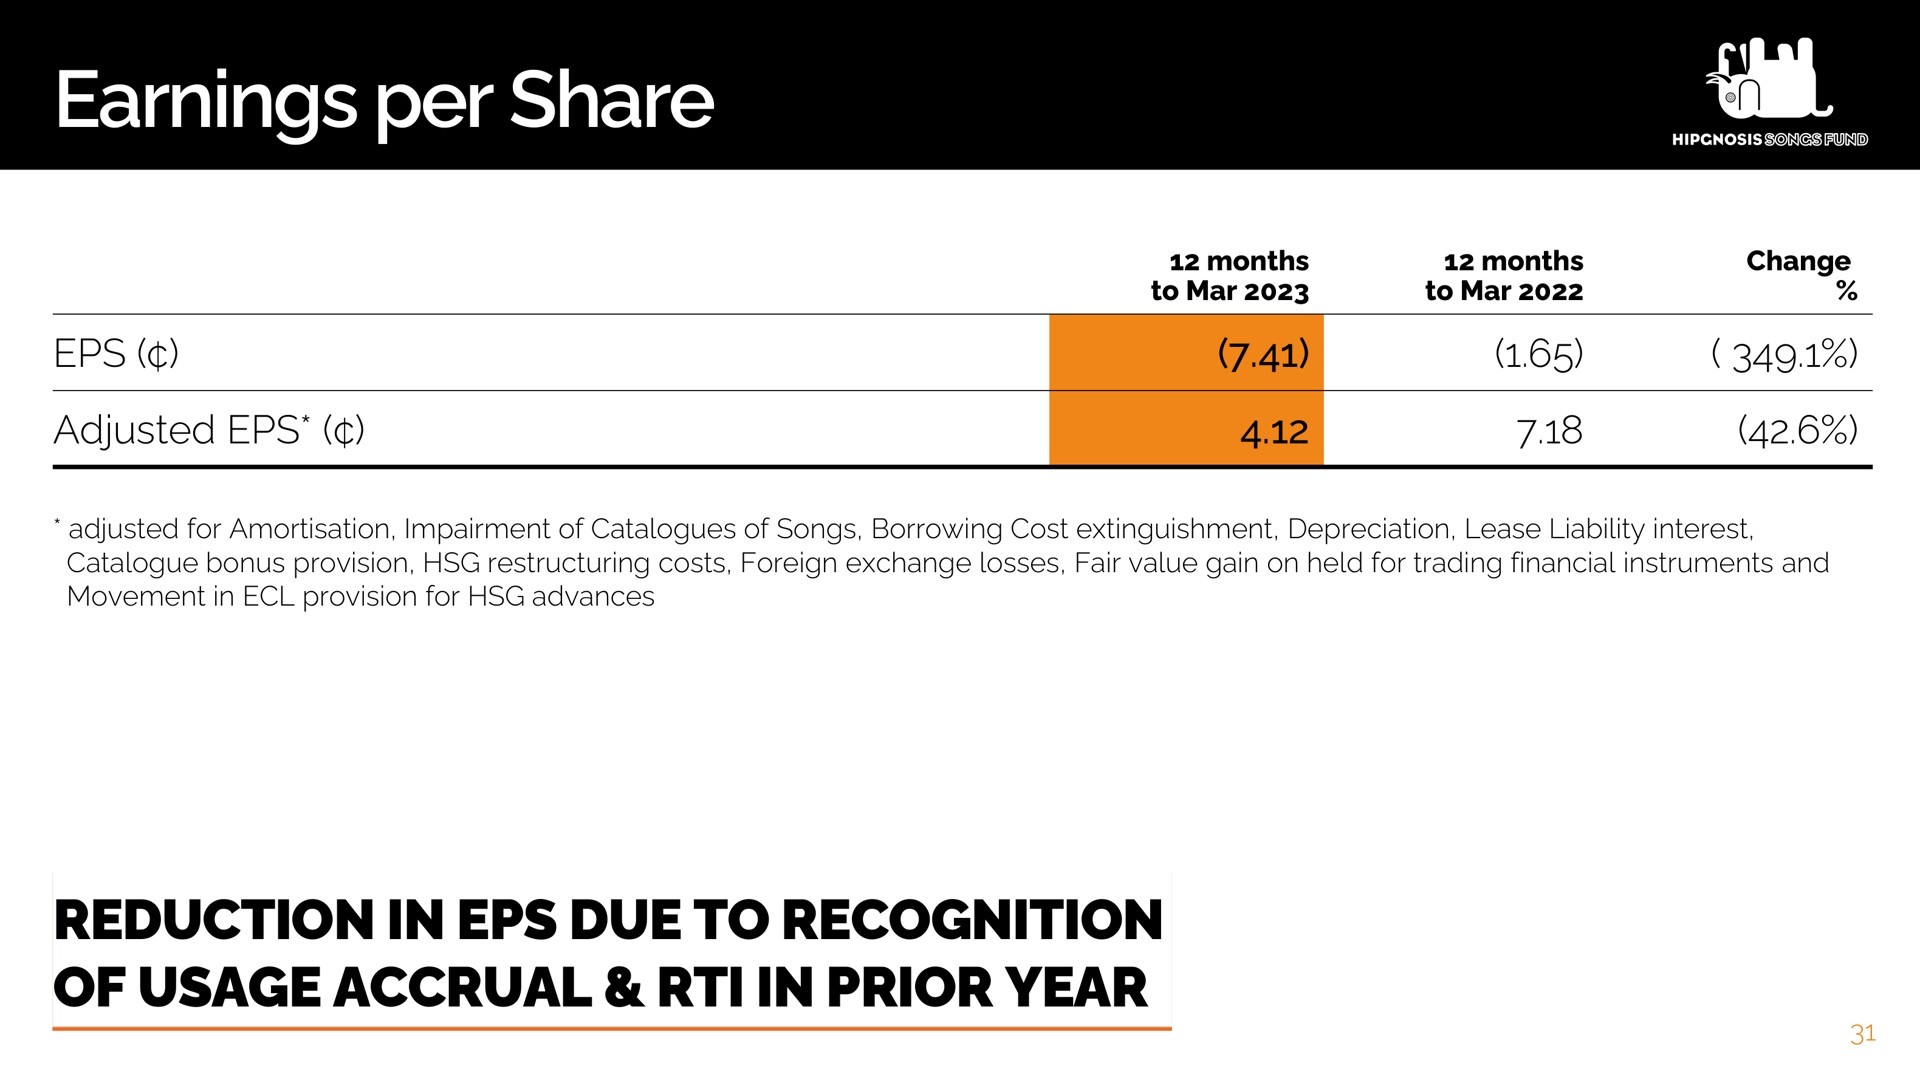 earnings per share reduction in due to recognition of usage accrual prior year | Hipgnosis Songs Fund